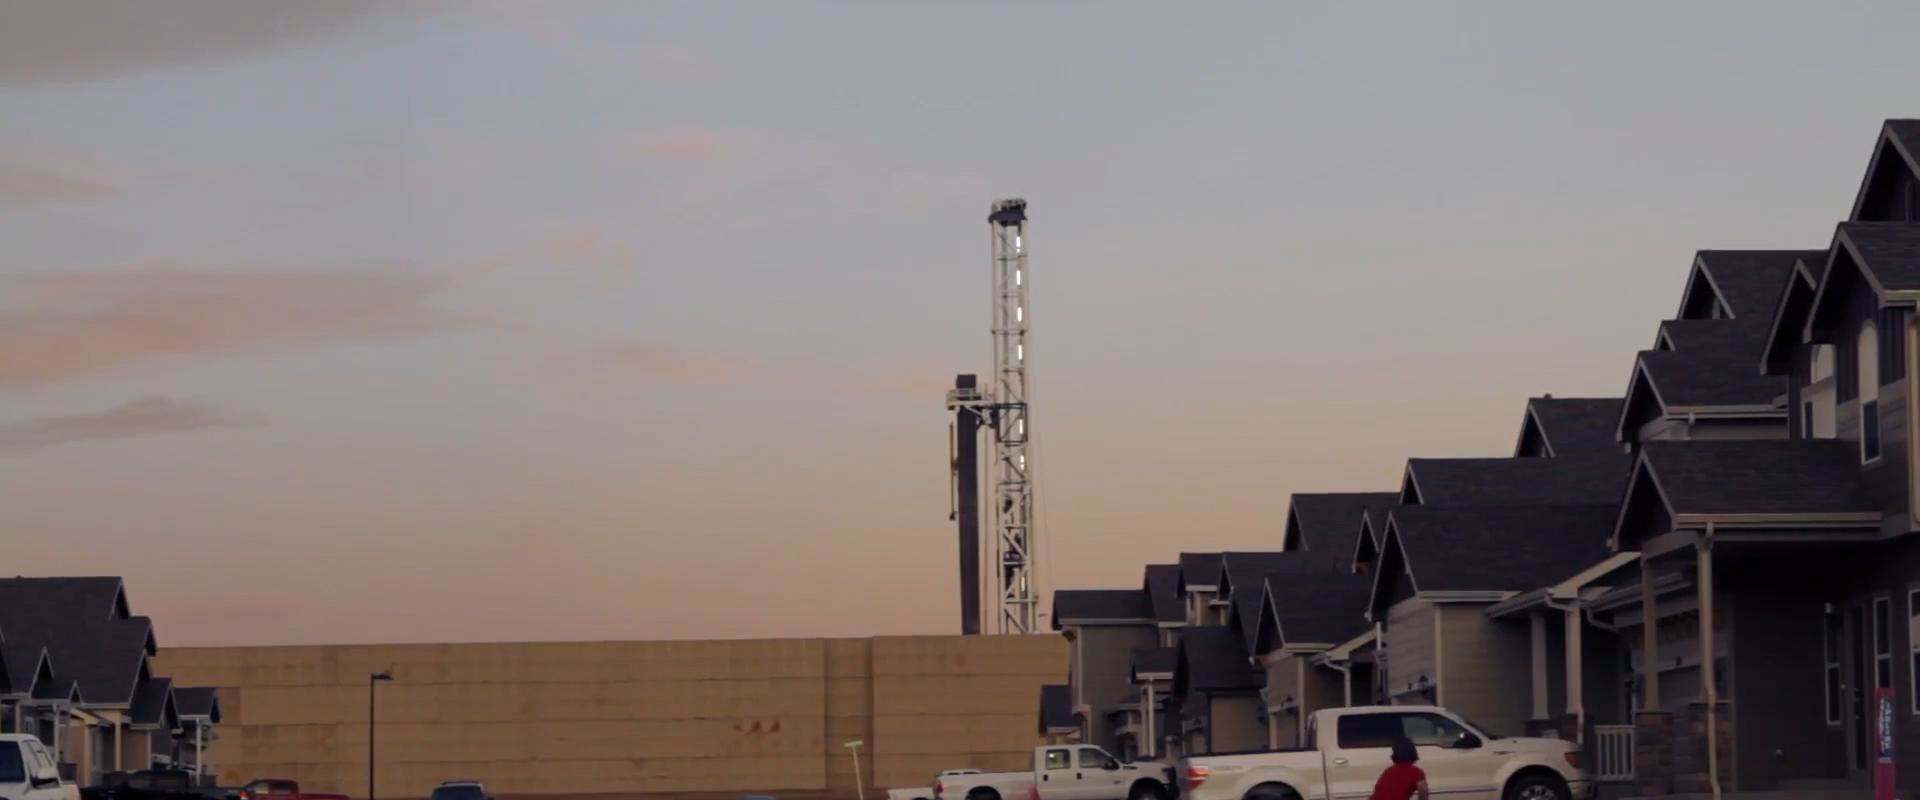 Fracking the System: Colorado's Oil and Gas Wars background 1